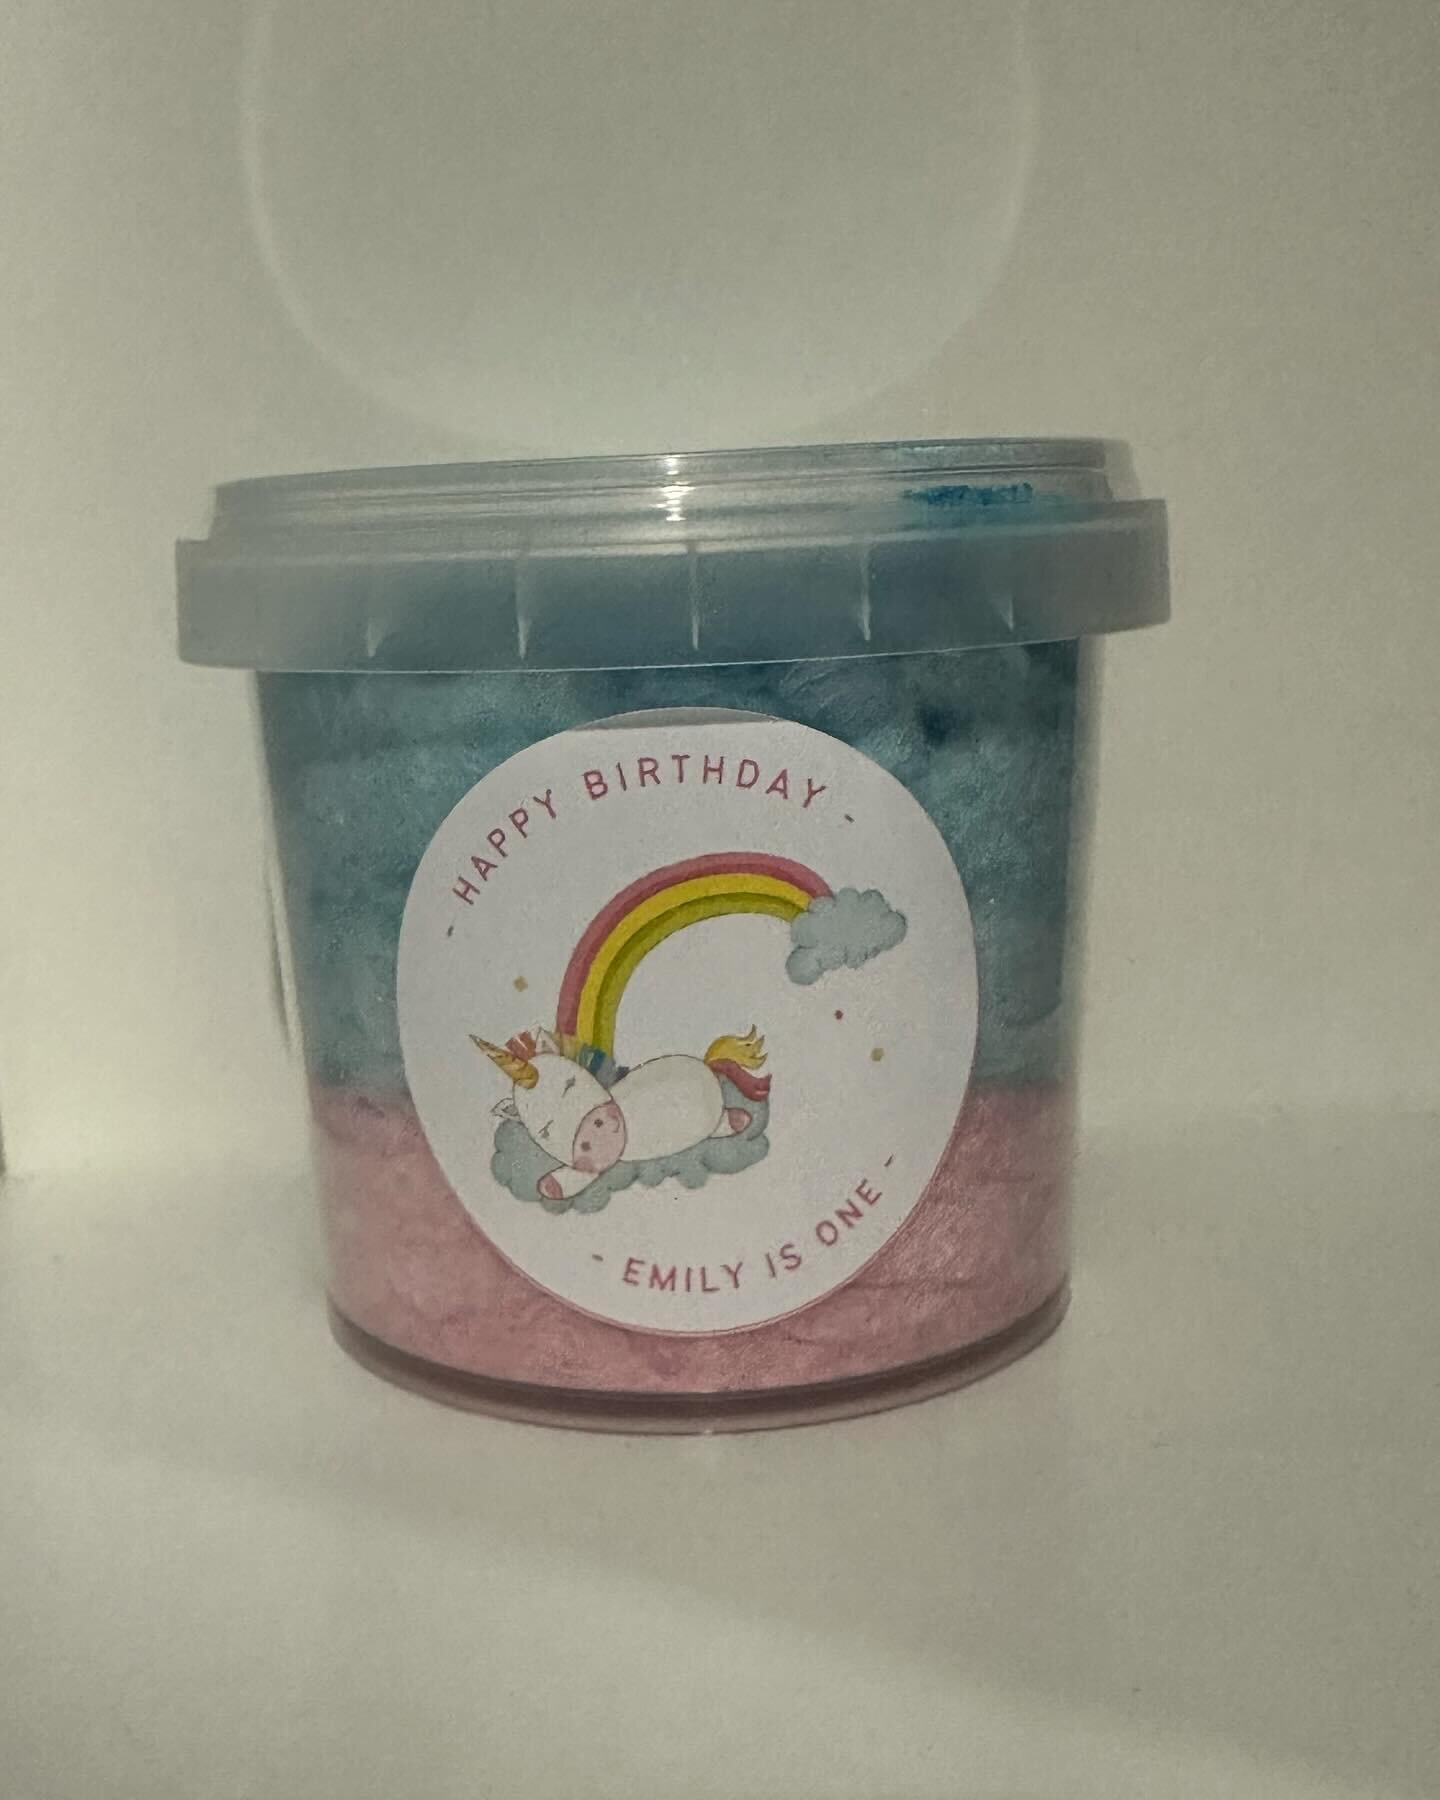 We make personalised fairy floss tubs for any occasion. #fairyfloss #partyfavours #fairyflosstubs #melbourne #birthdays #weddings #weddingfavours #birthdayfavours #christmasgifts #cottoncandy #cottoncandyfavours #foryou